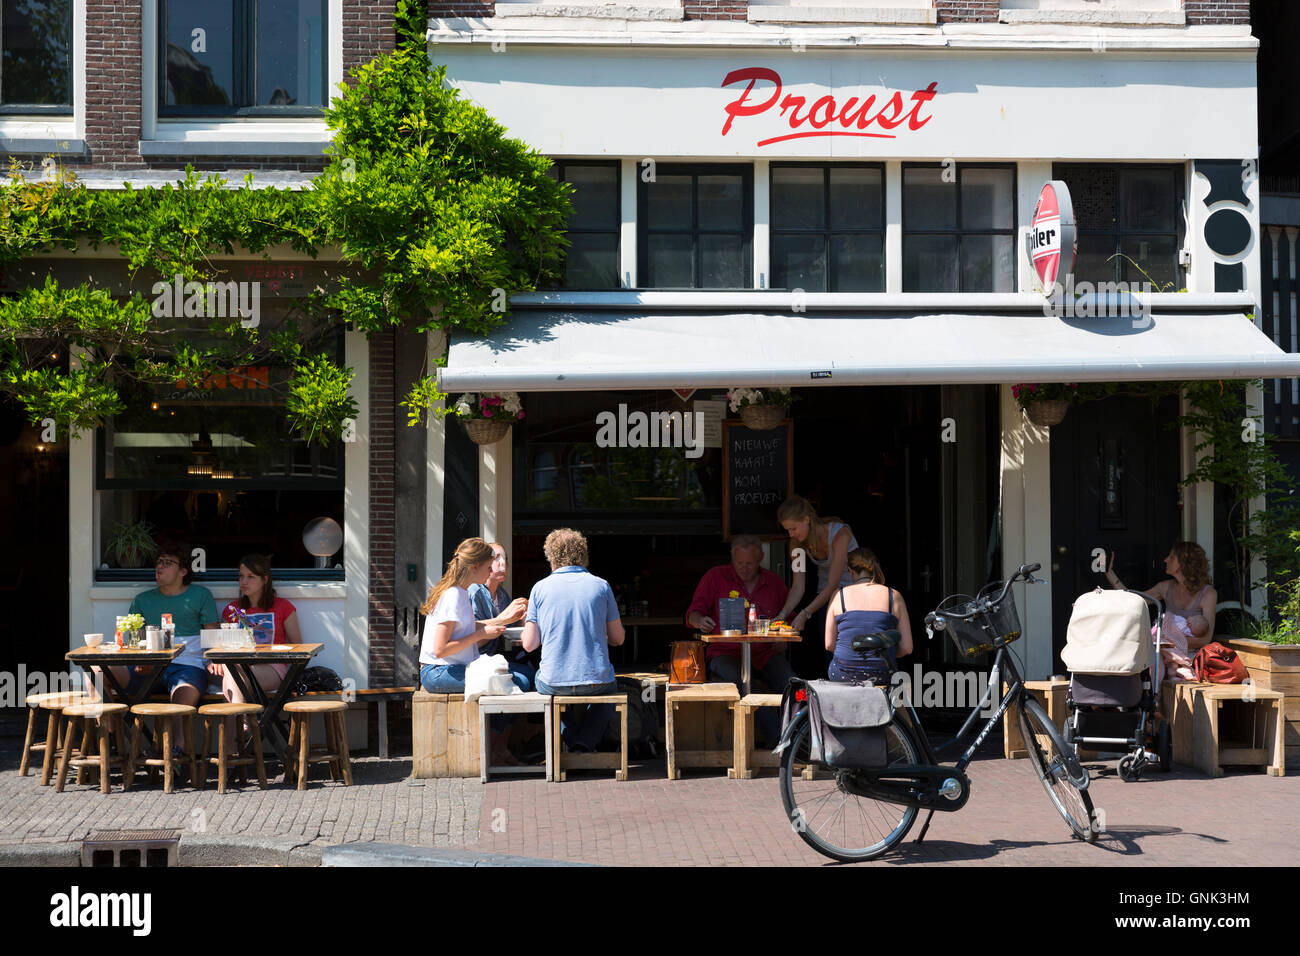 Locals and tourists dining at bar restaurant Cafe Proust in the  Noordermarkt - Northern Market area of Jordaan, Amsterdam Stock Photo -  Alamy